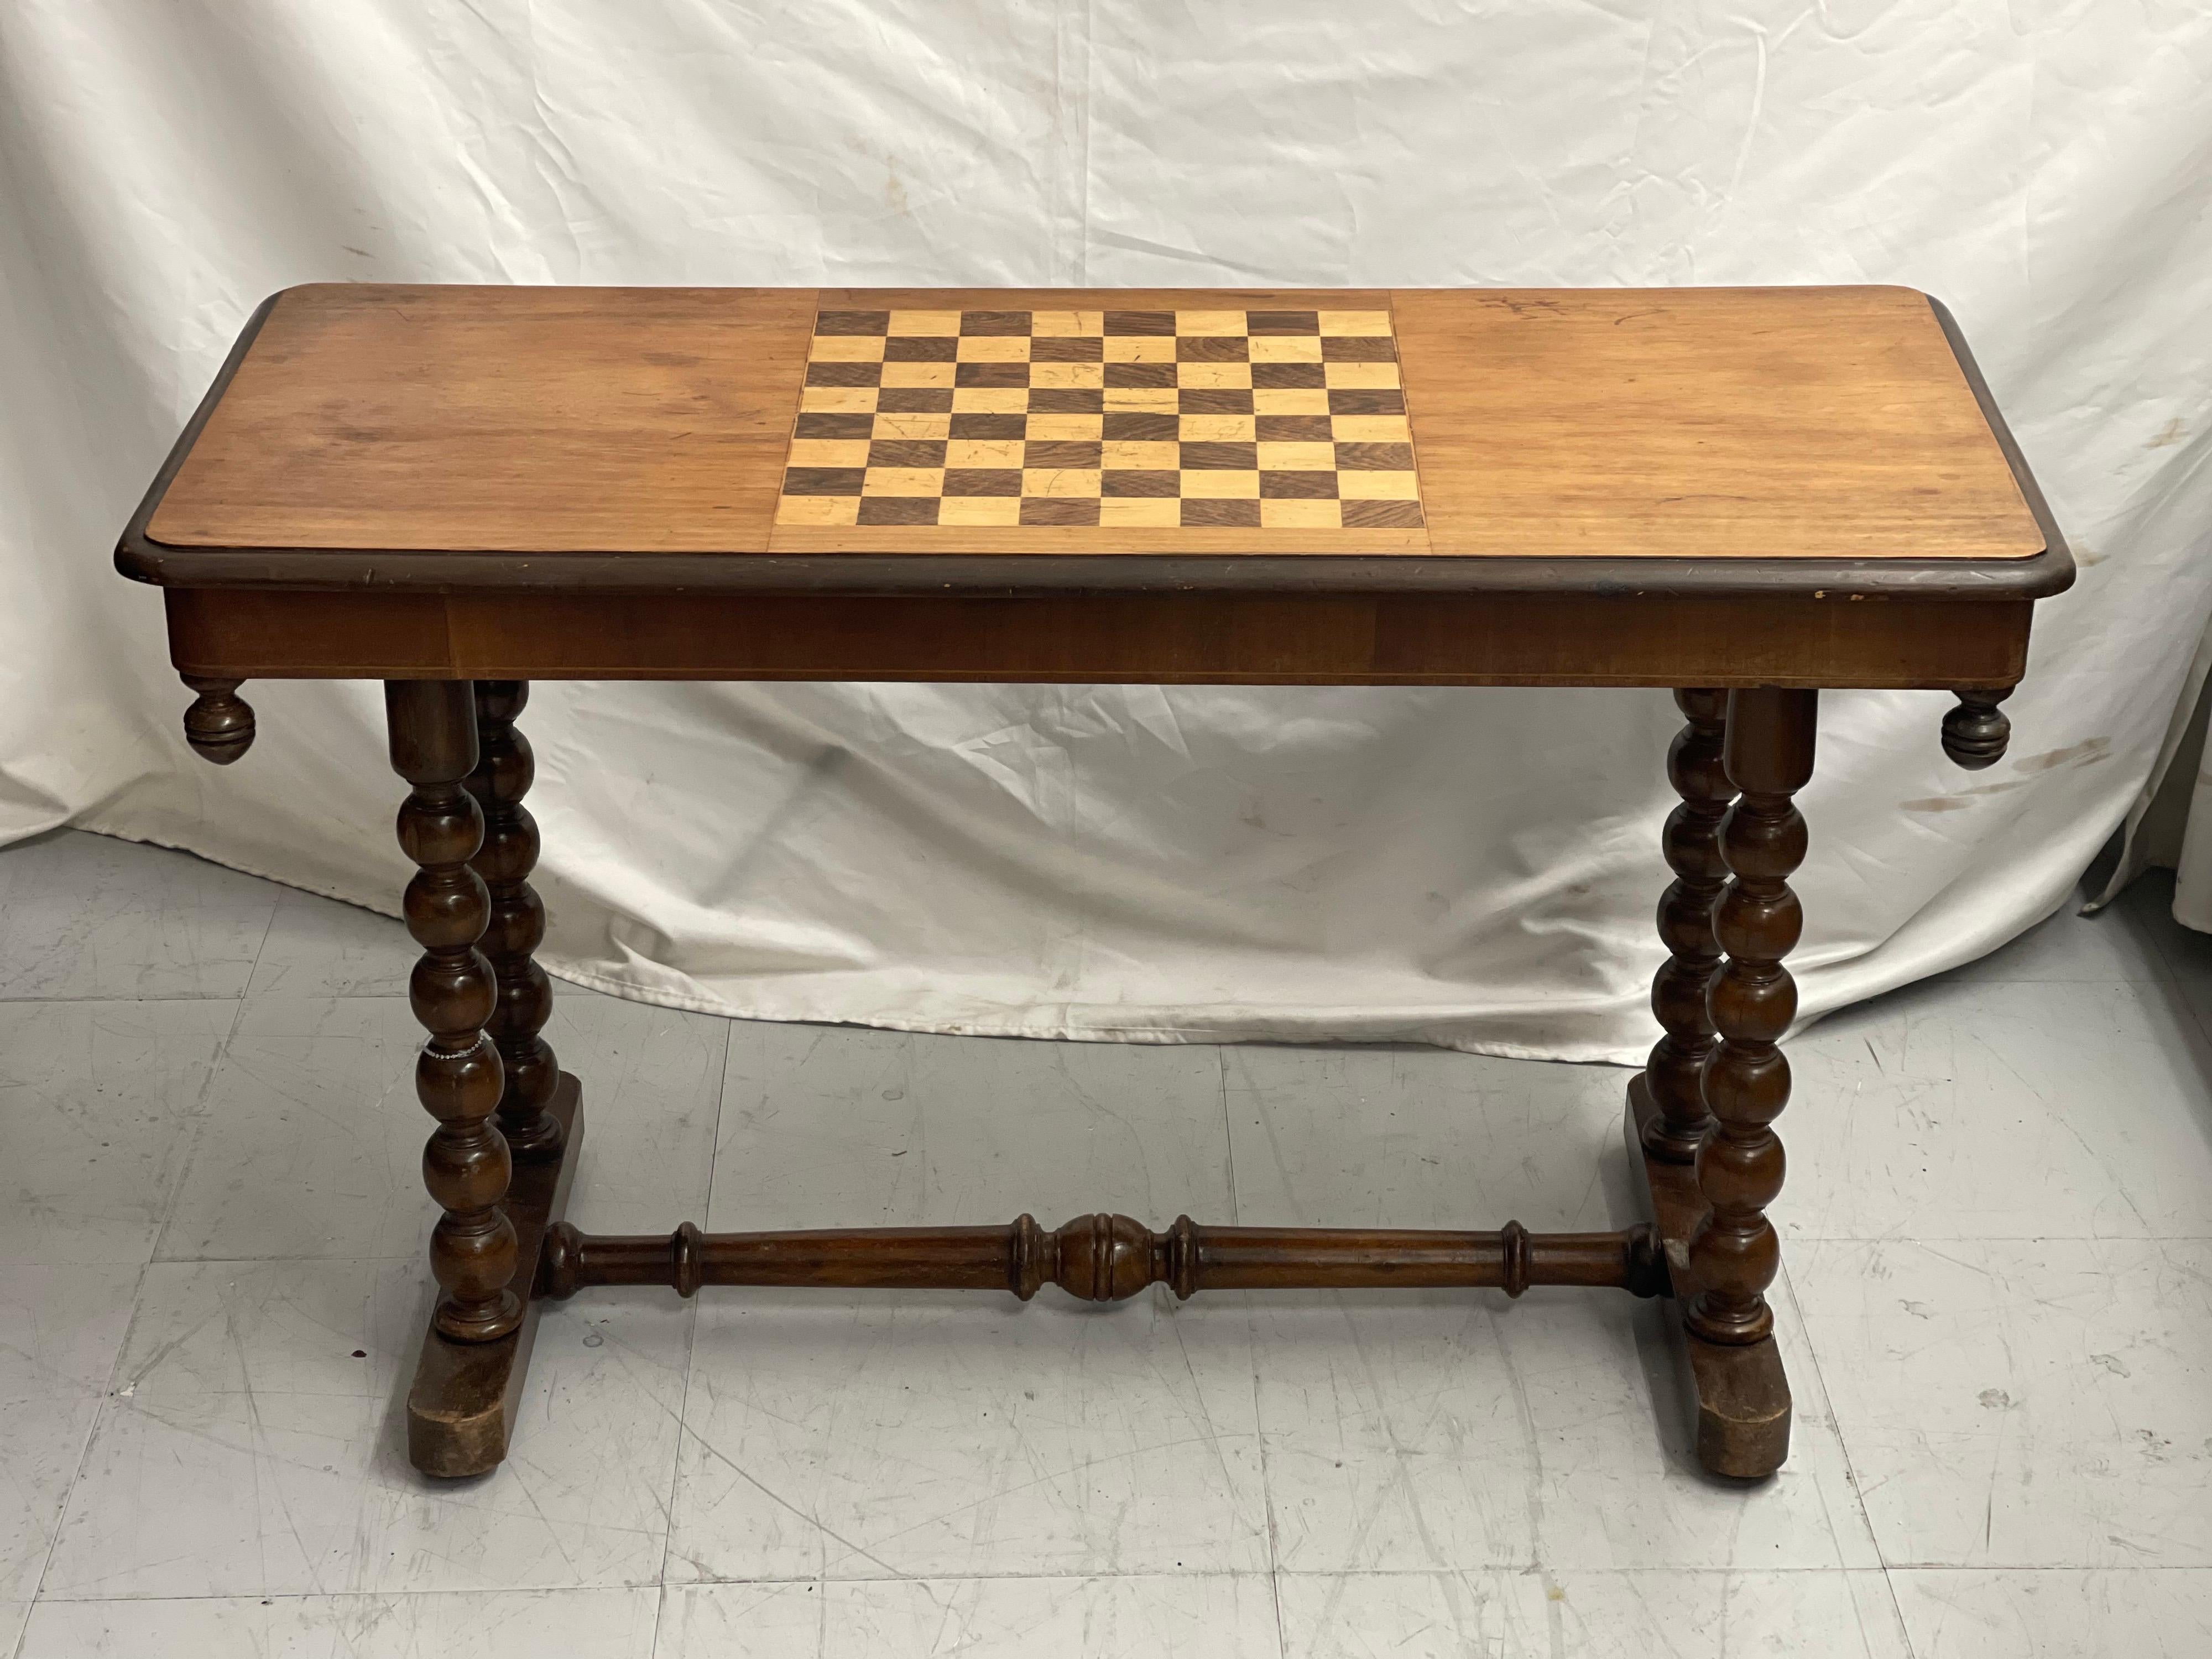 British Colonial Antique Victorian Burr Walnut Chess Games Occasional Table Bobbin Turned Base